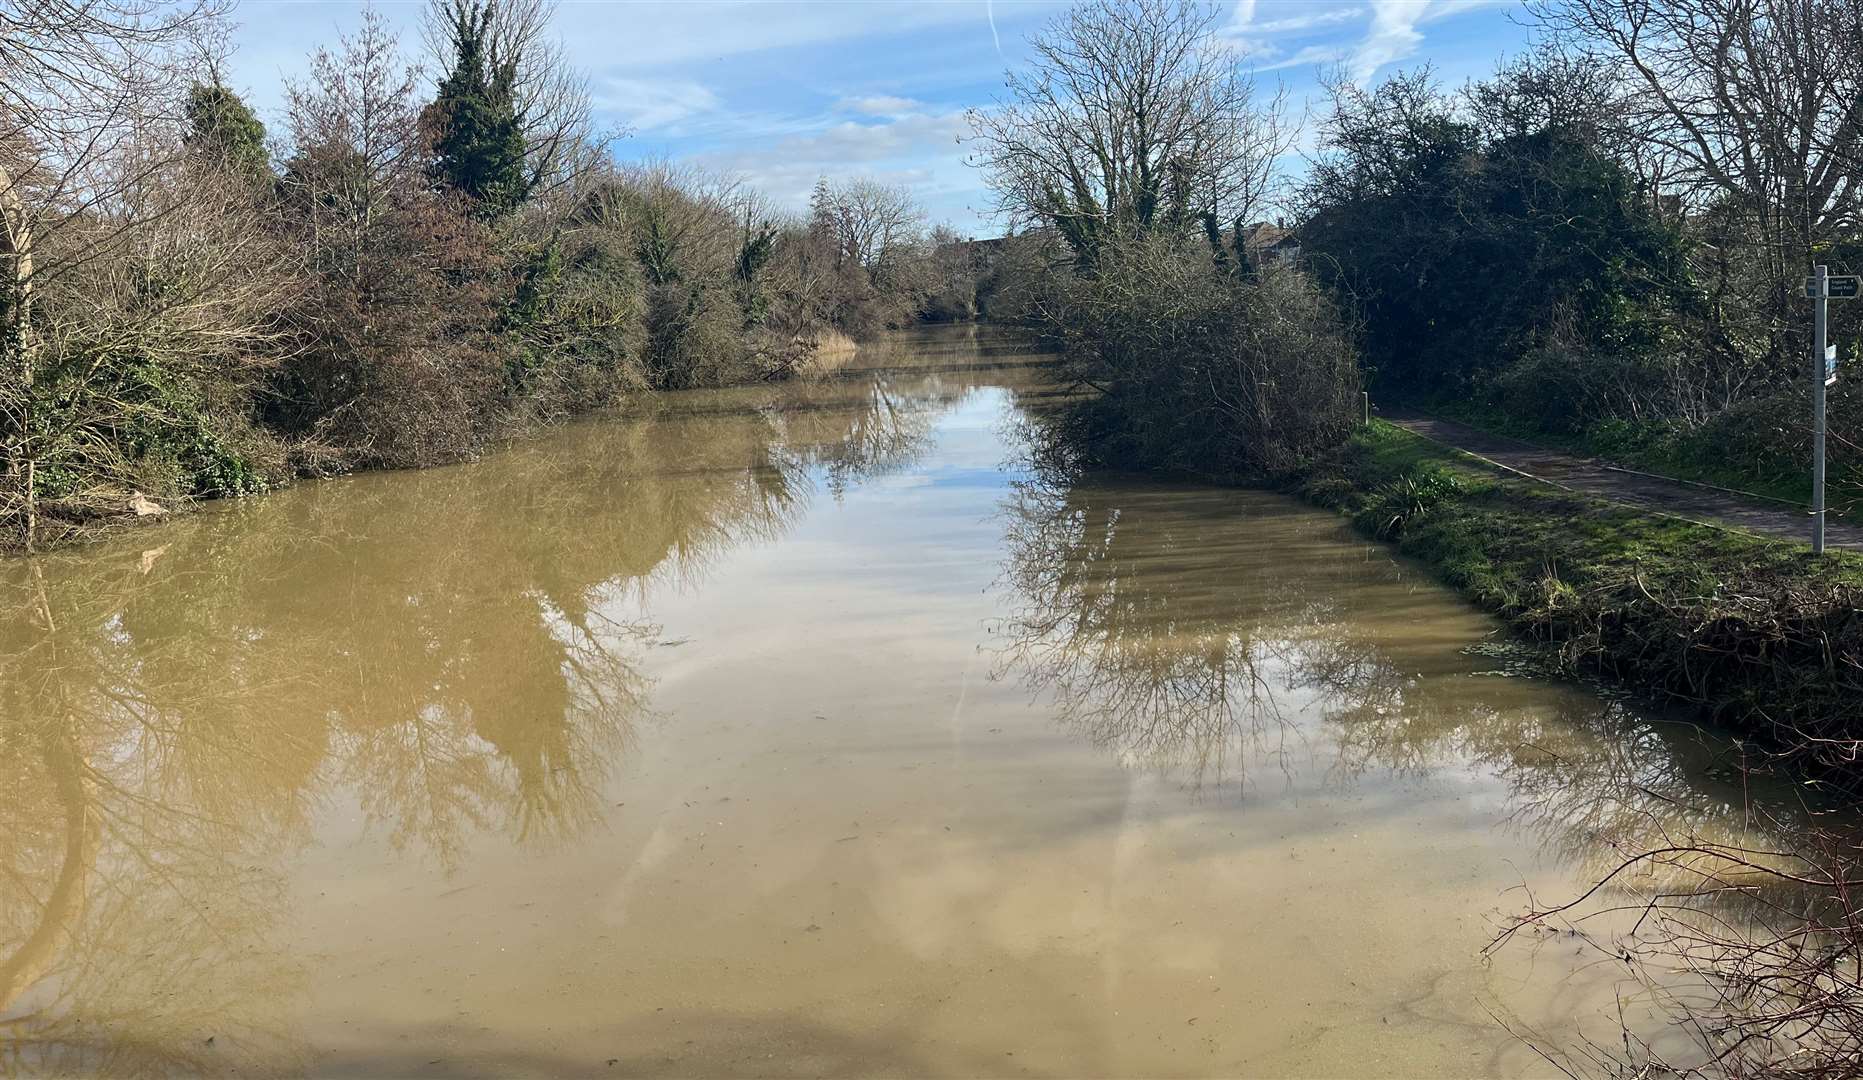 The Royal Military Canal in Hythe burst its banks earlier this week